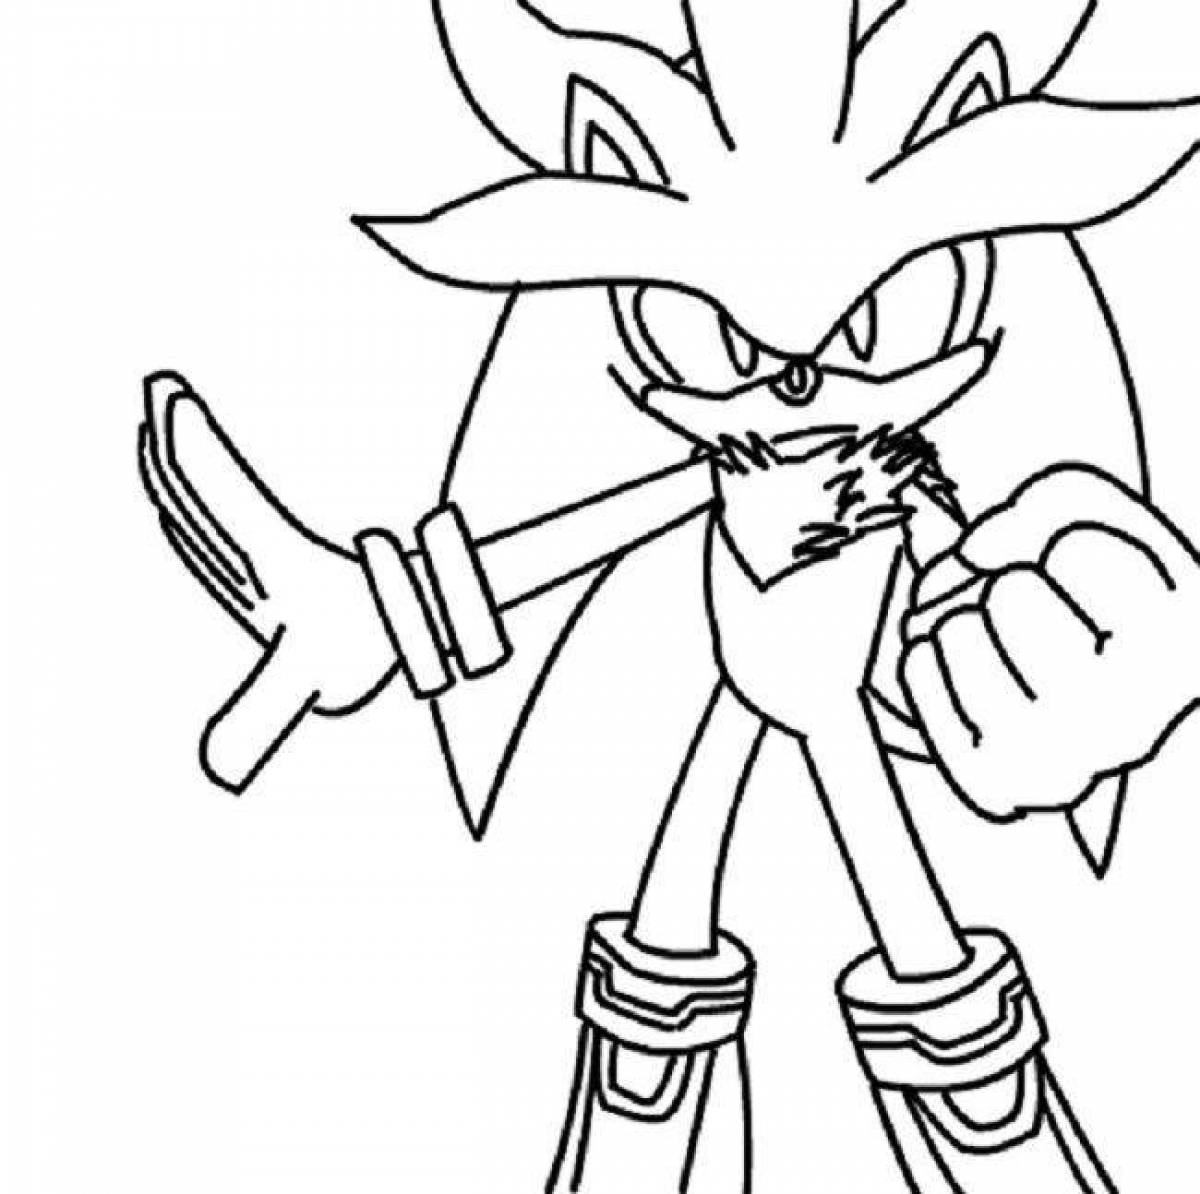 Sparkling sonic silver coloring book